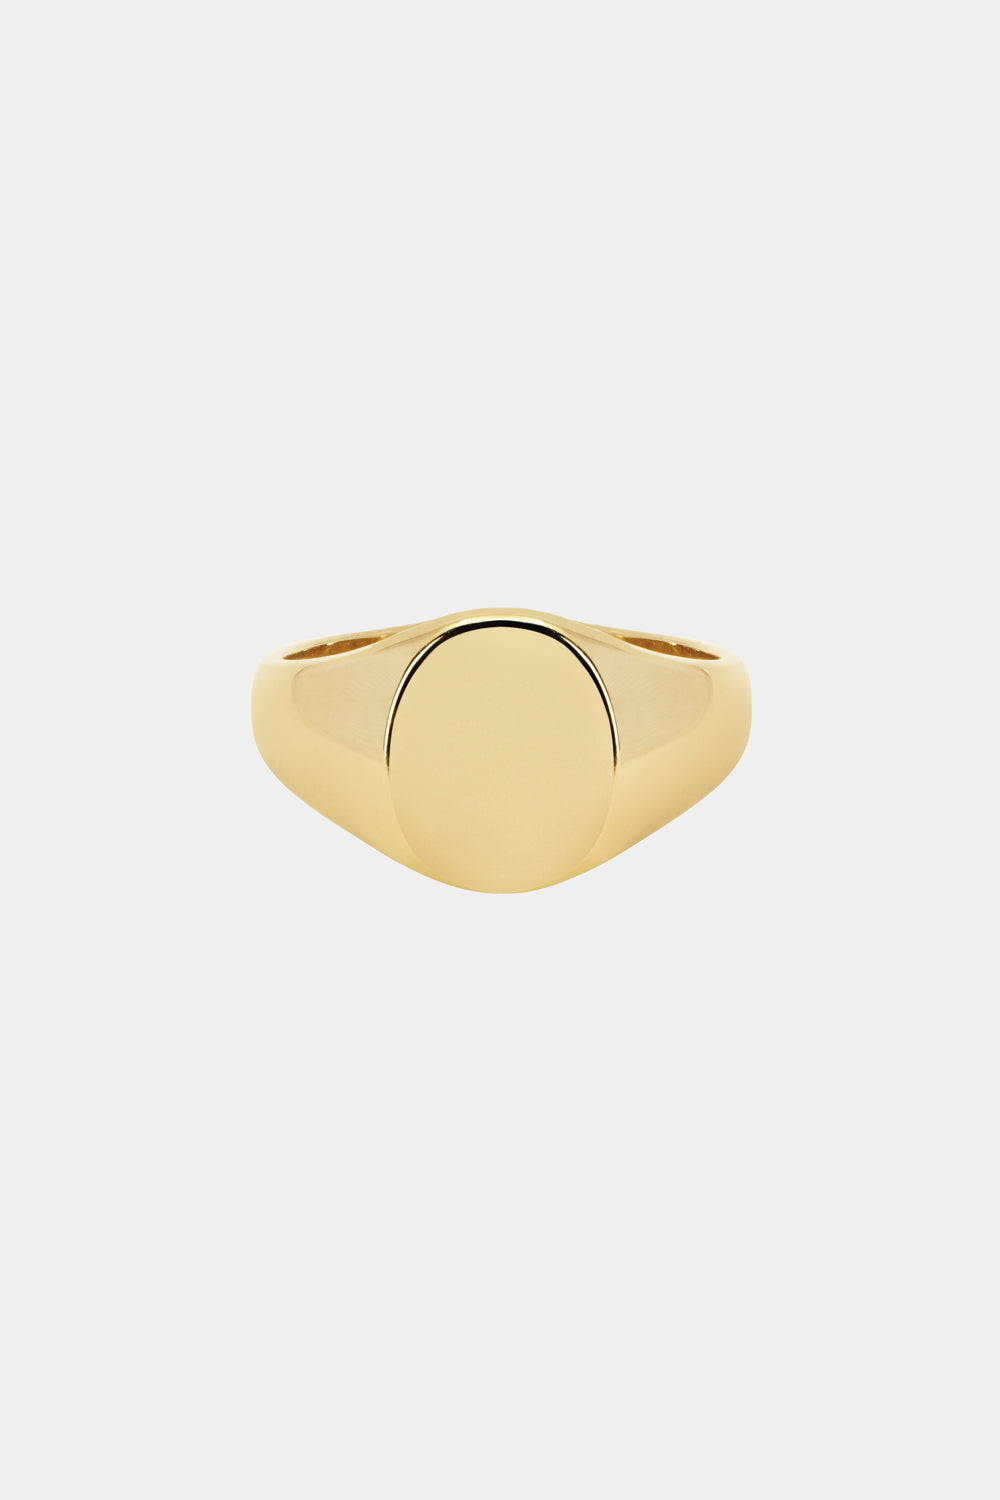 Oval Signet Ring | Yellow Gold, More Options Available| Natasha Schweitzer